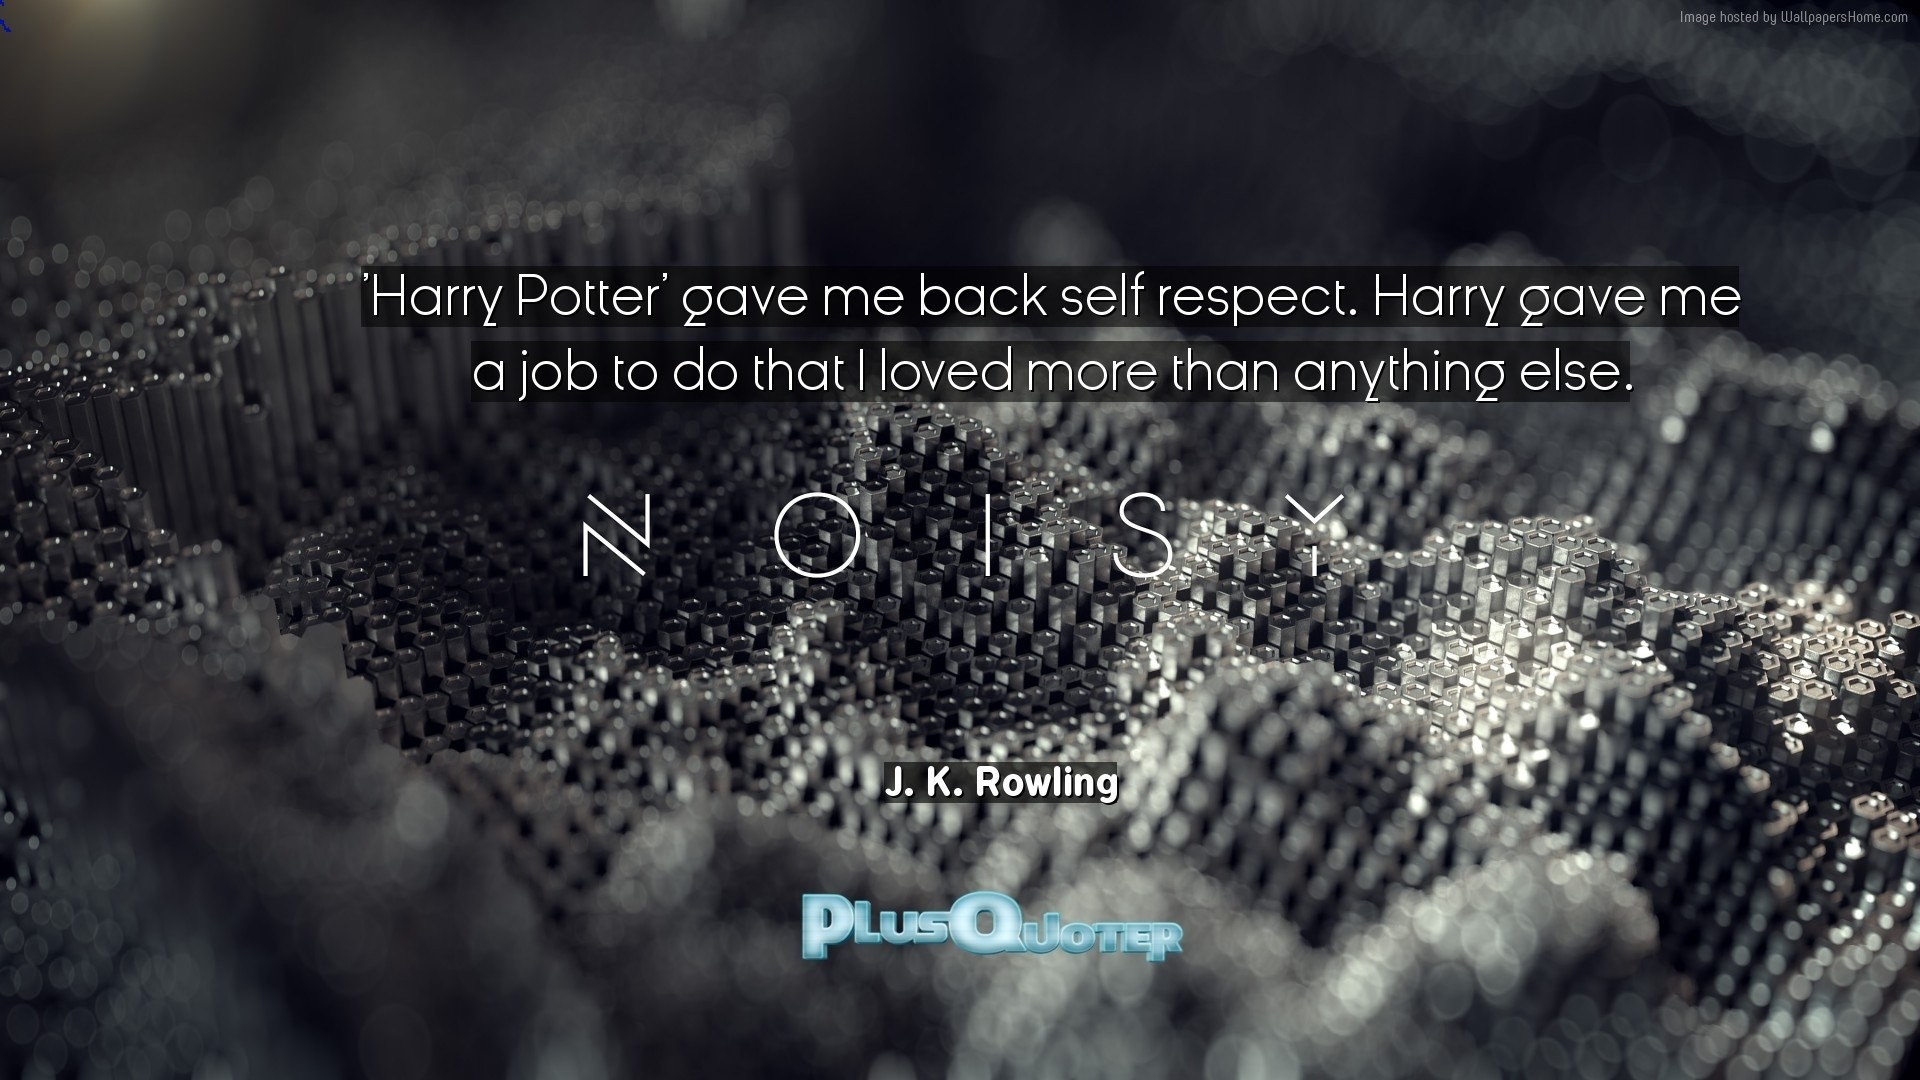 1920x1080 inspirational jk rowling quotes - harry potter u0027 gave me back self  respect harry gave me a job to do